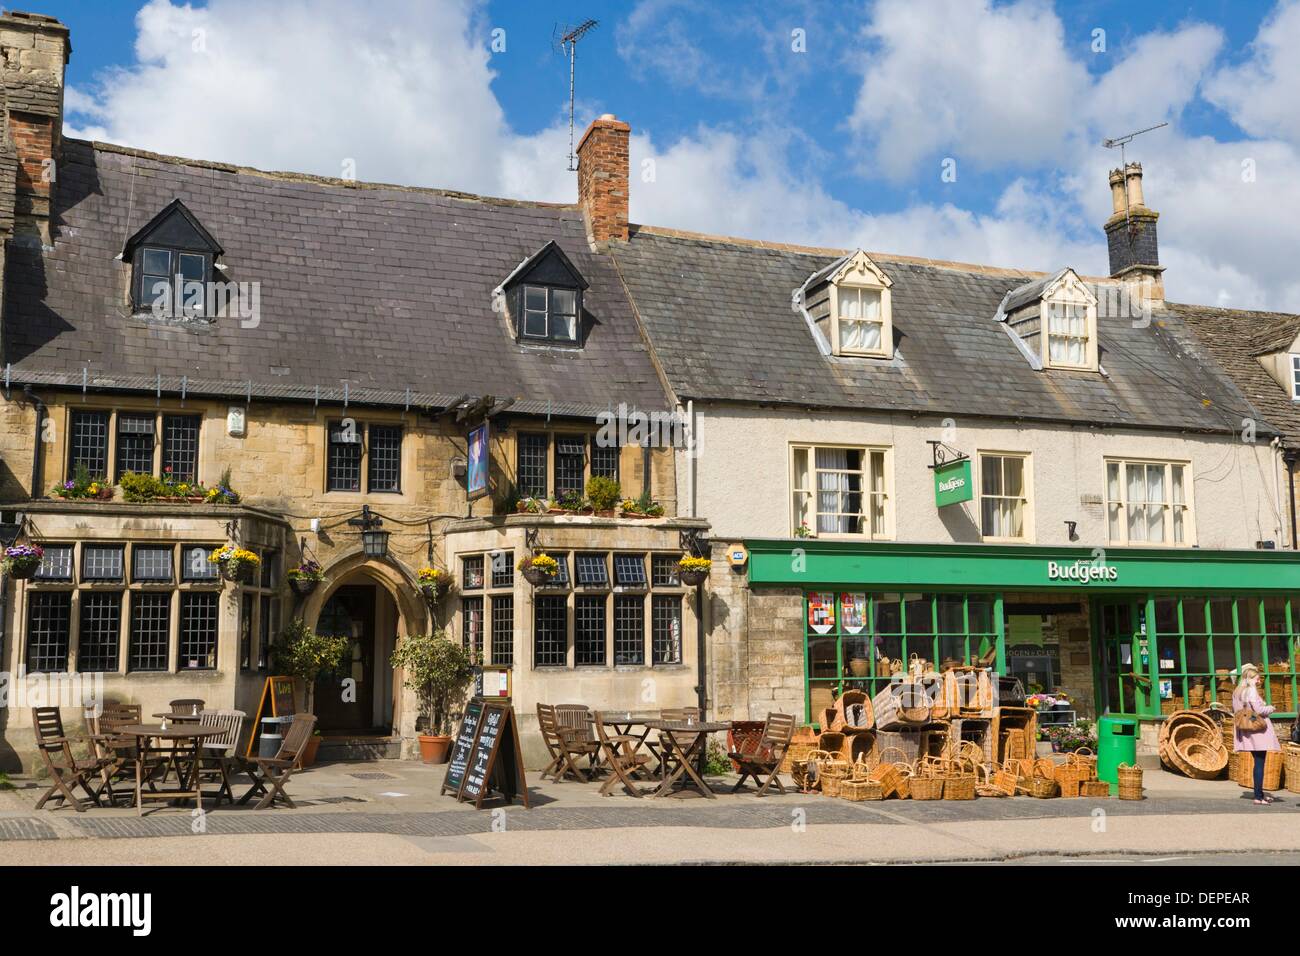 High Street, Burford, Cotswolds, West Oxfordshire, England, Regno Unito Foto Stock